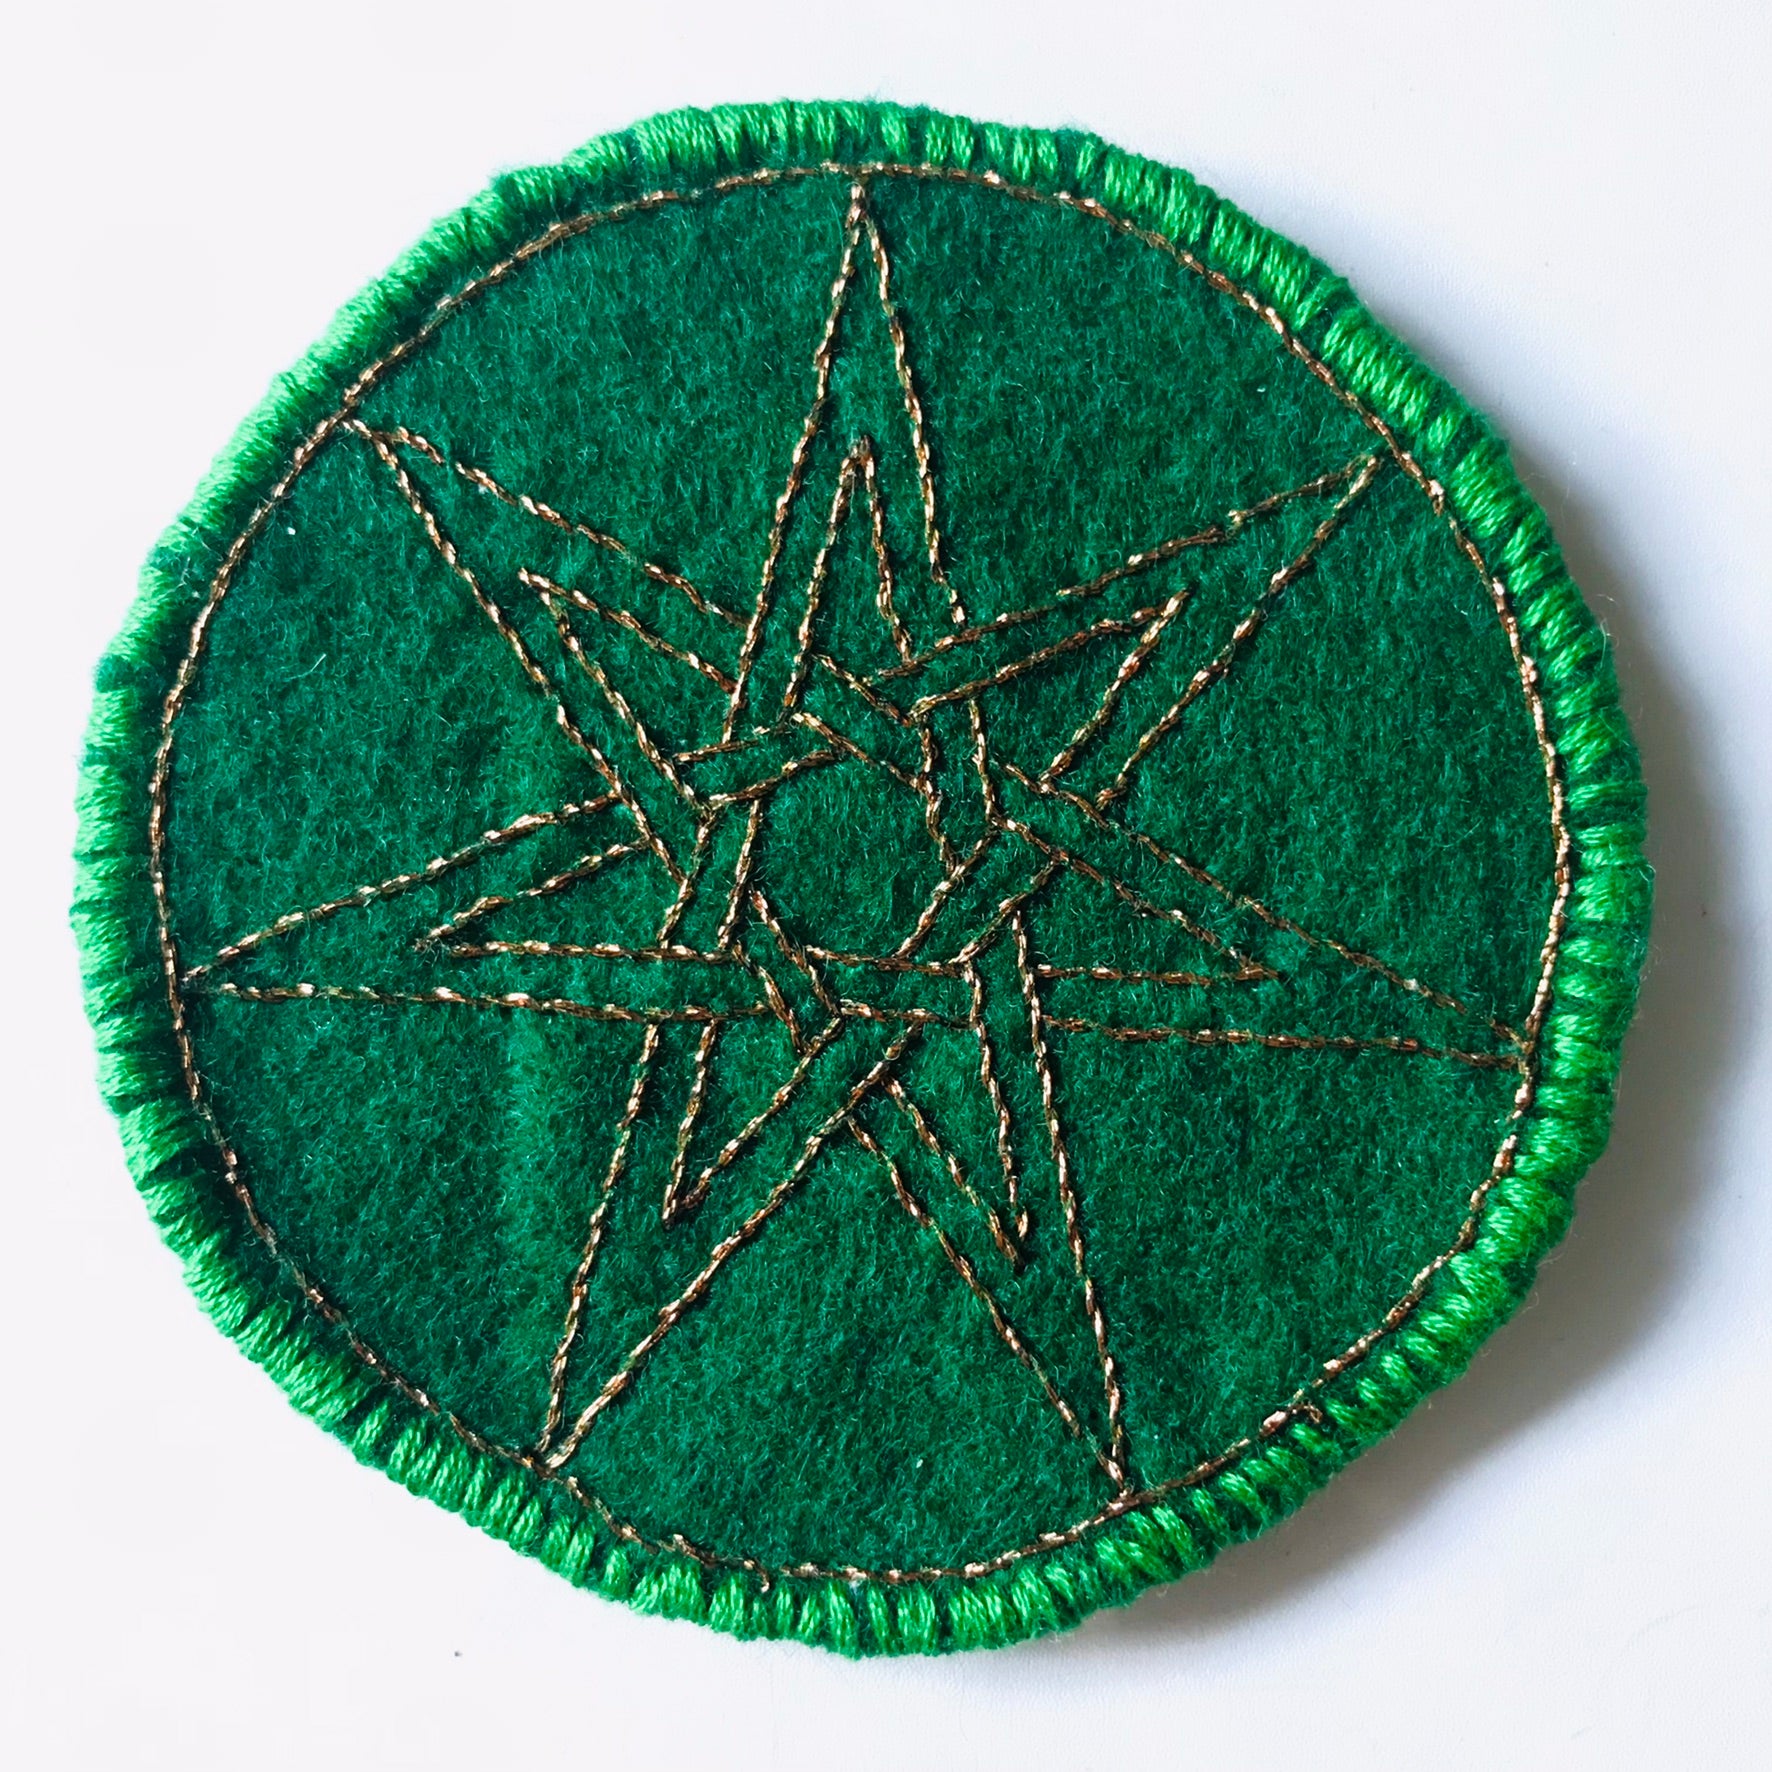 FAERIE STAR, GREEN FELT & COPPER METAL THREAD EMBROIDERED PROTECTION PATCHES, MINI TRAVEL CRYSTAL CHARGERS, ALTER PIECES